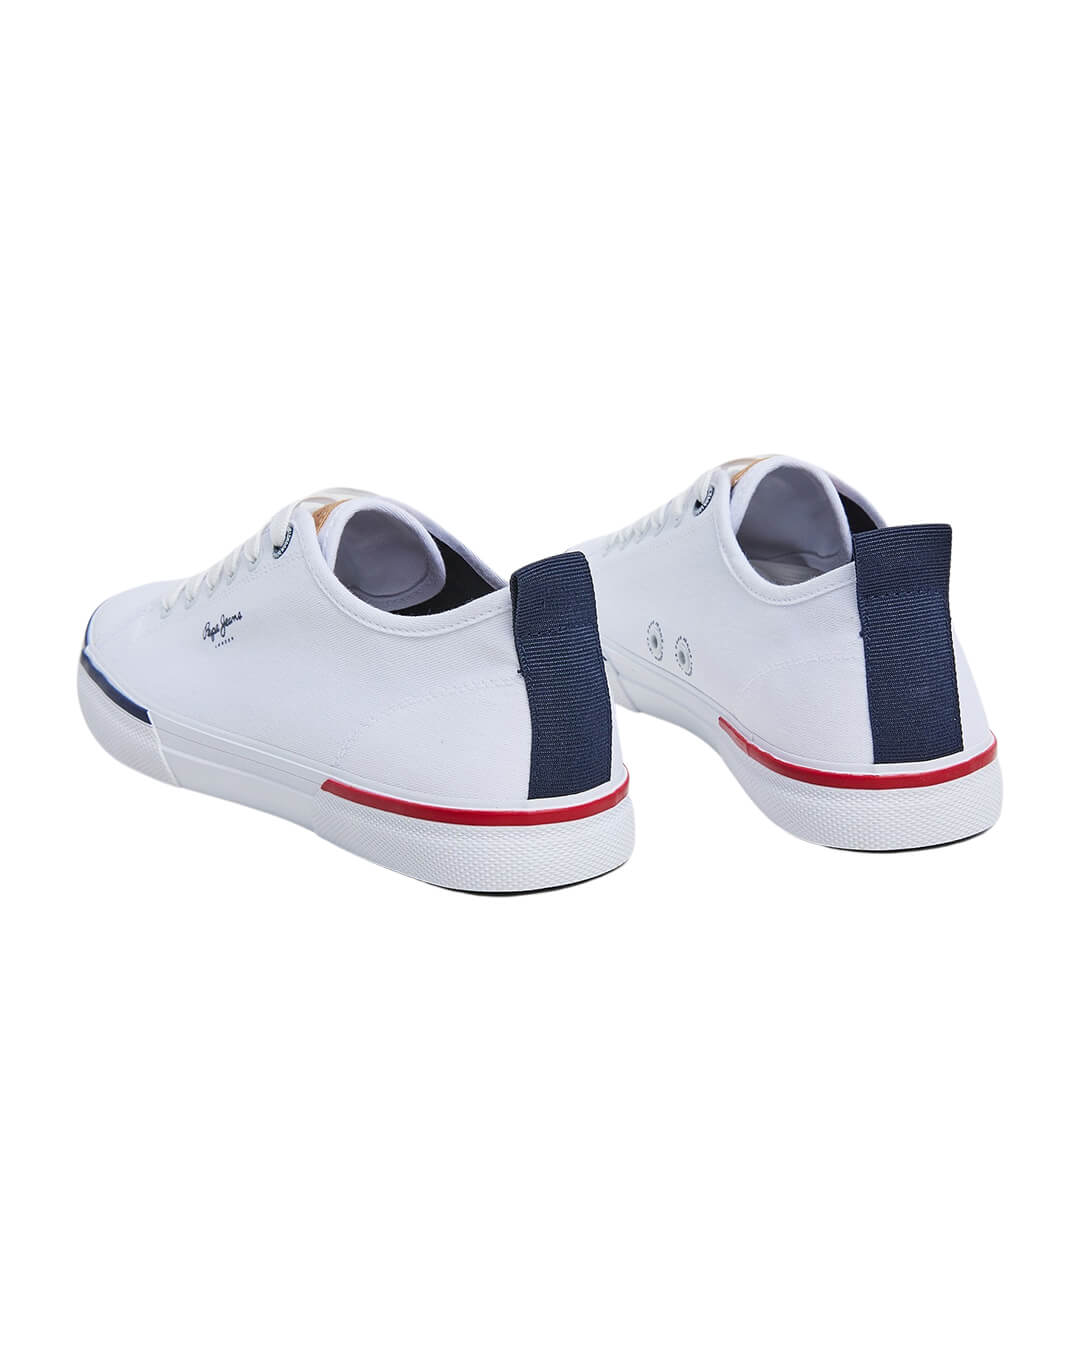 Pepe Jeans Shoes Pepe Jeans White Cupsole Sneakers